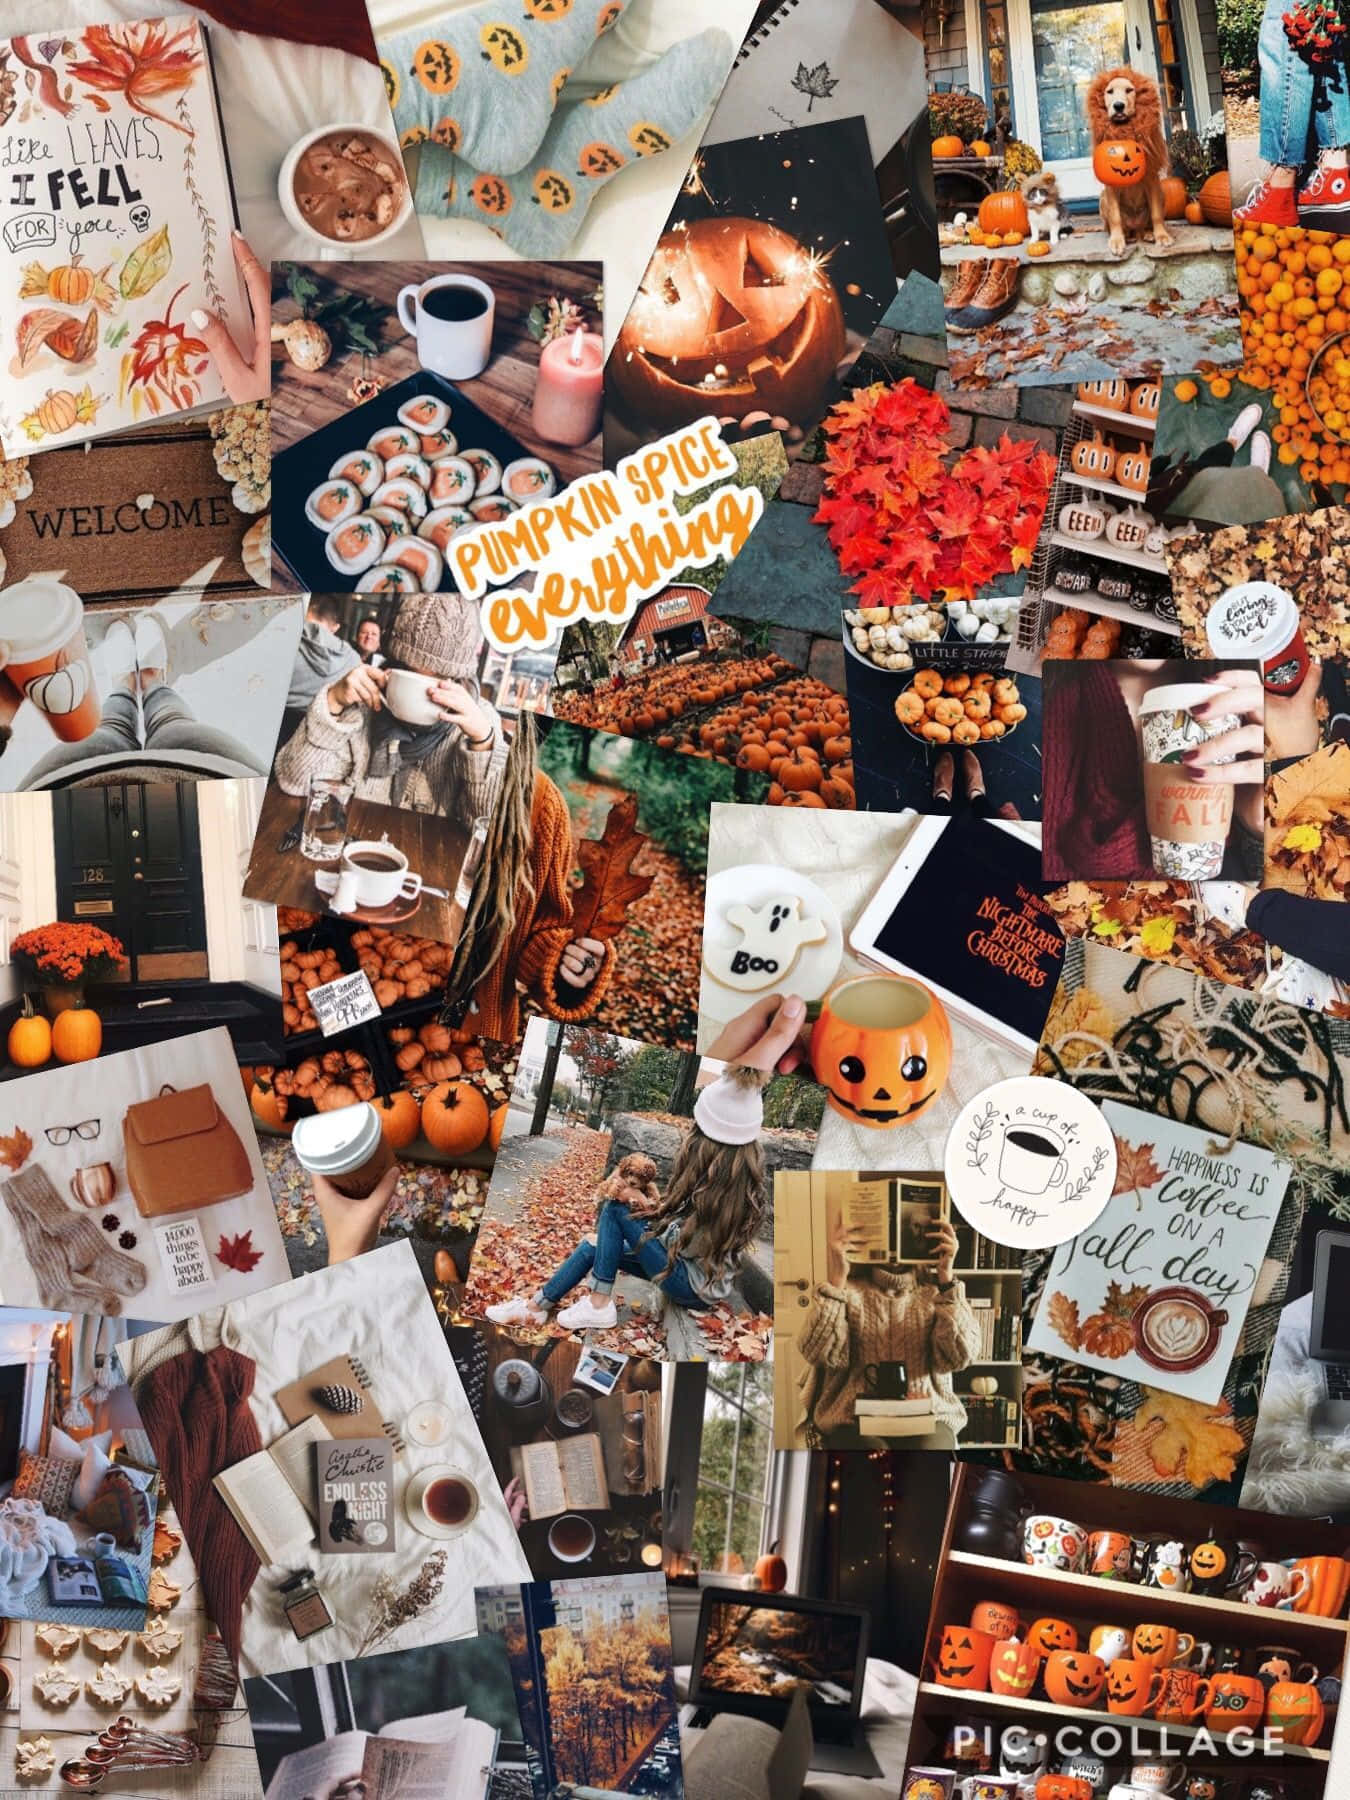 "Fulfill your Fall Break dreams with an exciting collage of adventures" Wallpaper